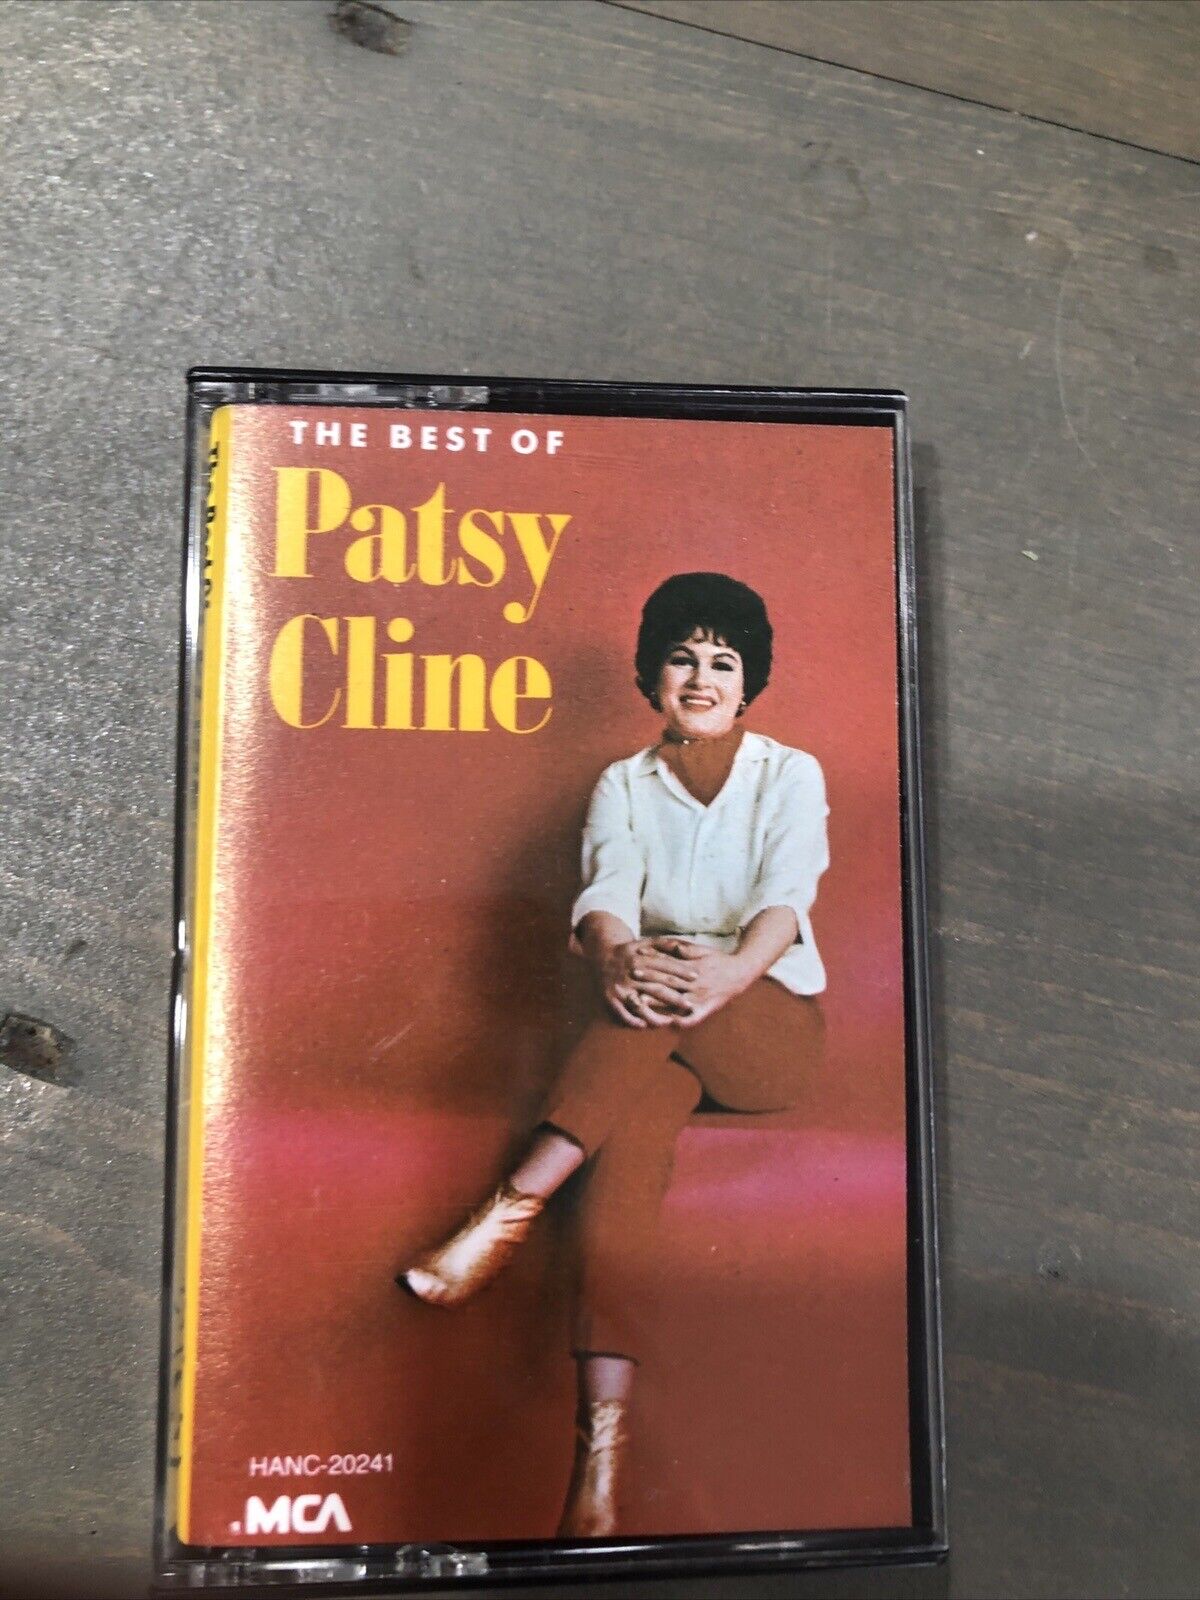 The Best Of Patsy Cline (Cassette Tape) 1985 MCA Records I Fall To Pieces Crazy